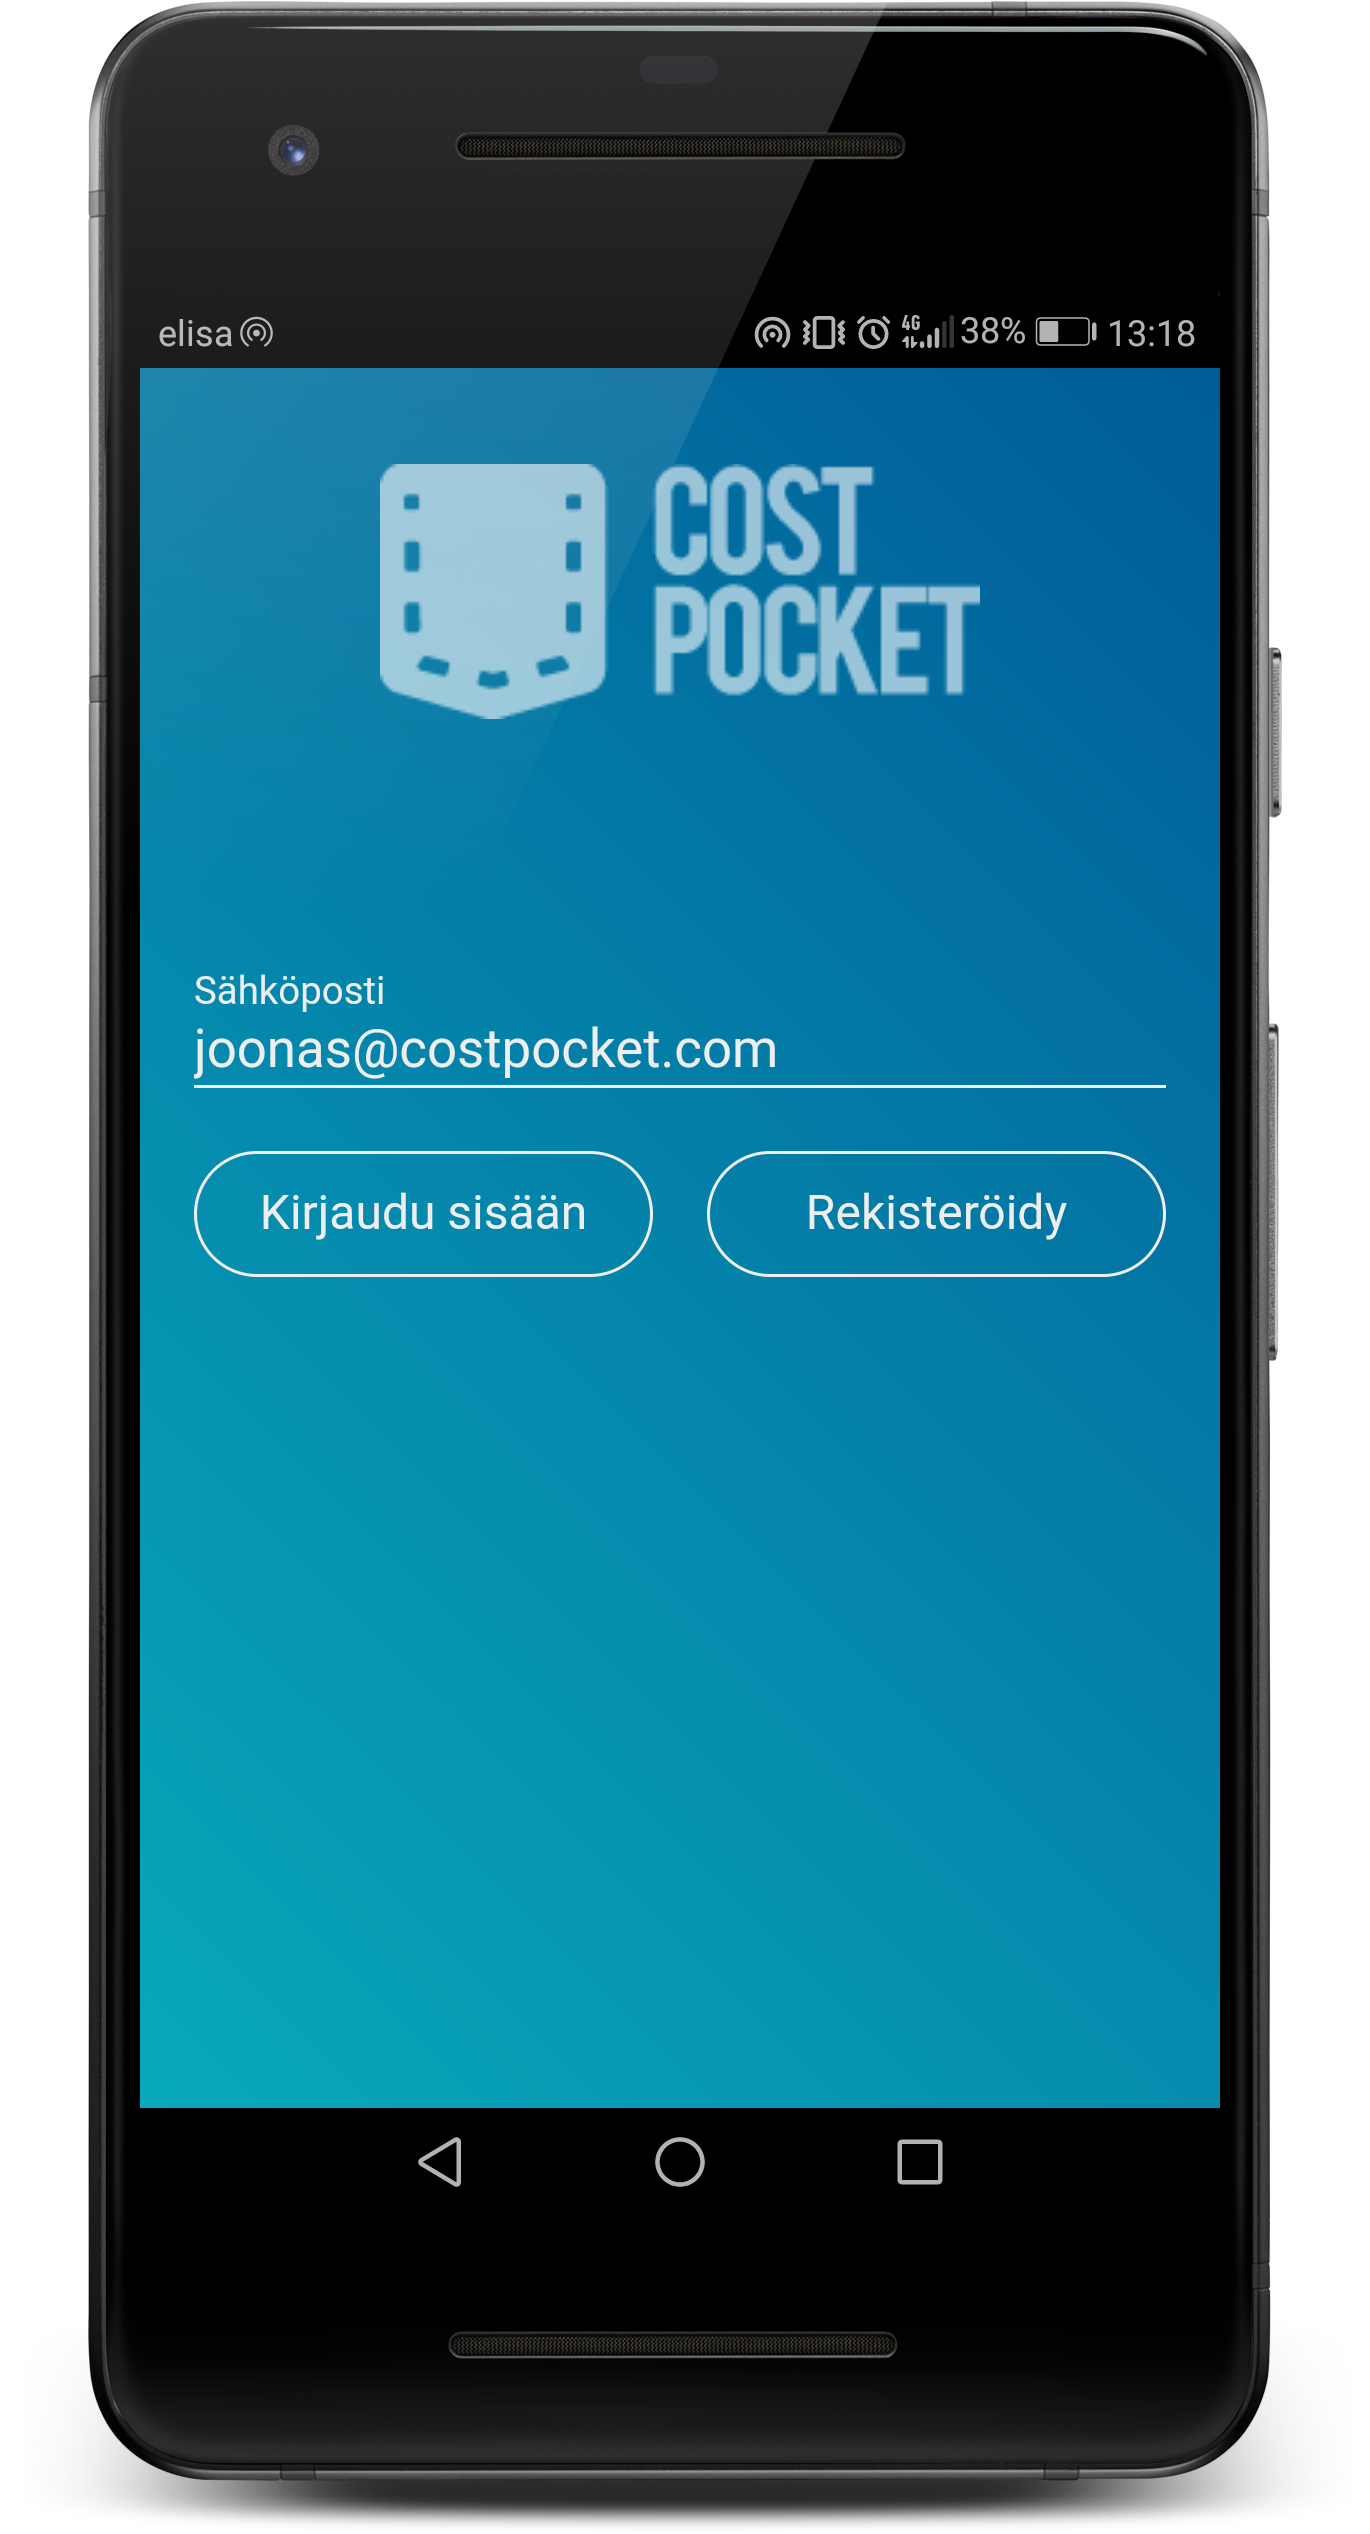 The easiest expense management app with OCR - CostPocket